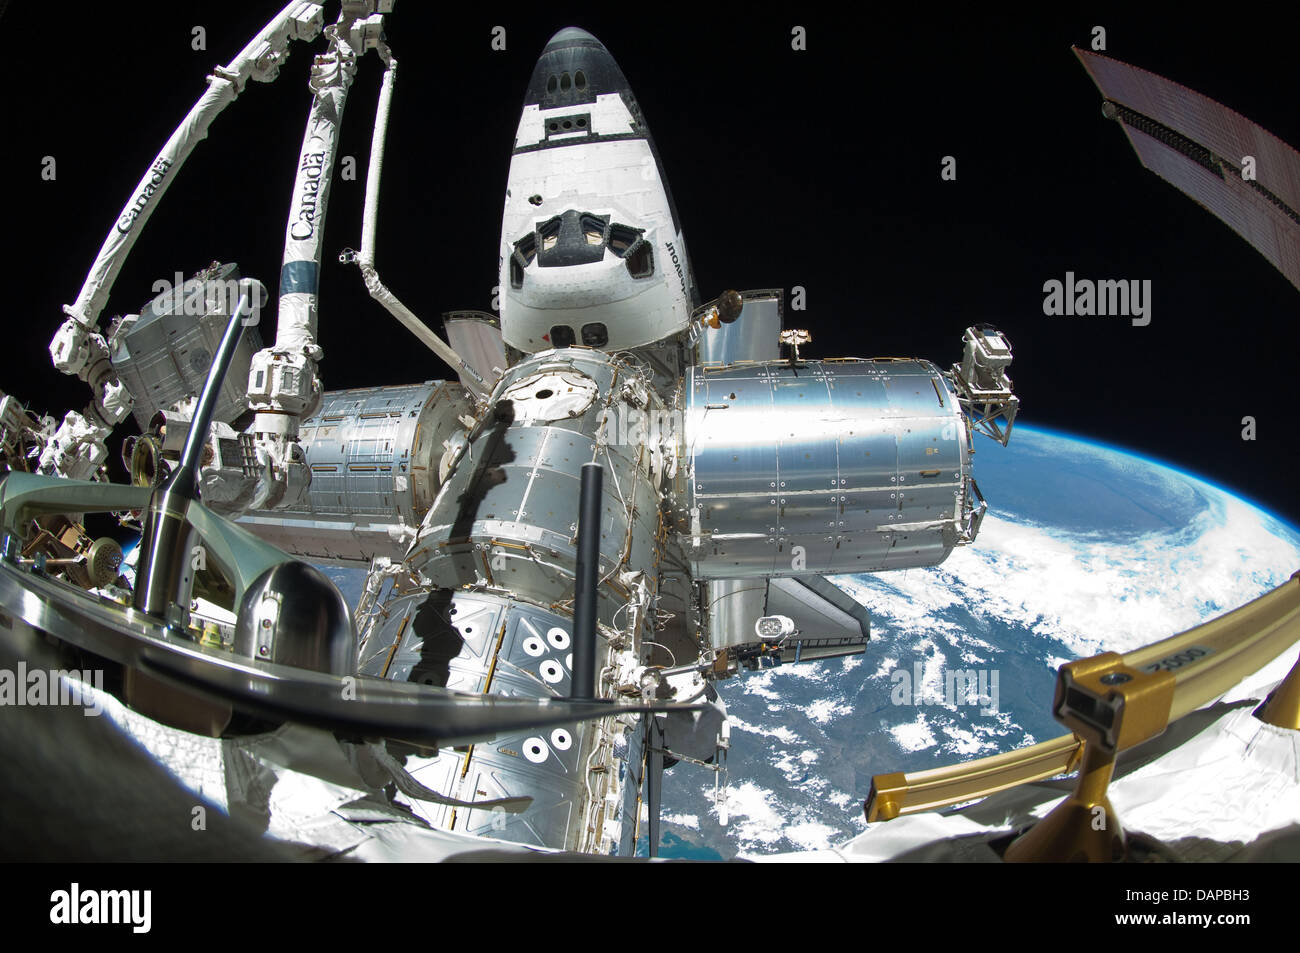 A portion of the International Space Station and the docked space shuttle Endeavour is featured in this image photographed by a spacewalker, using a fish-eye lens attached to an electronic still camera, during the STS-134 mission's fourth session of extravehicular activity (EVA) on May 27, 2011. The blackness of space and Earth's horizon provide the backdrop for the scene. Credit:  Stock Photo